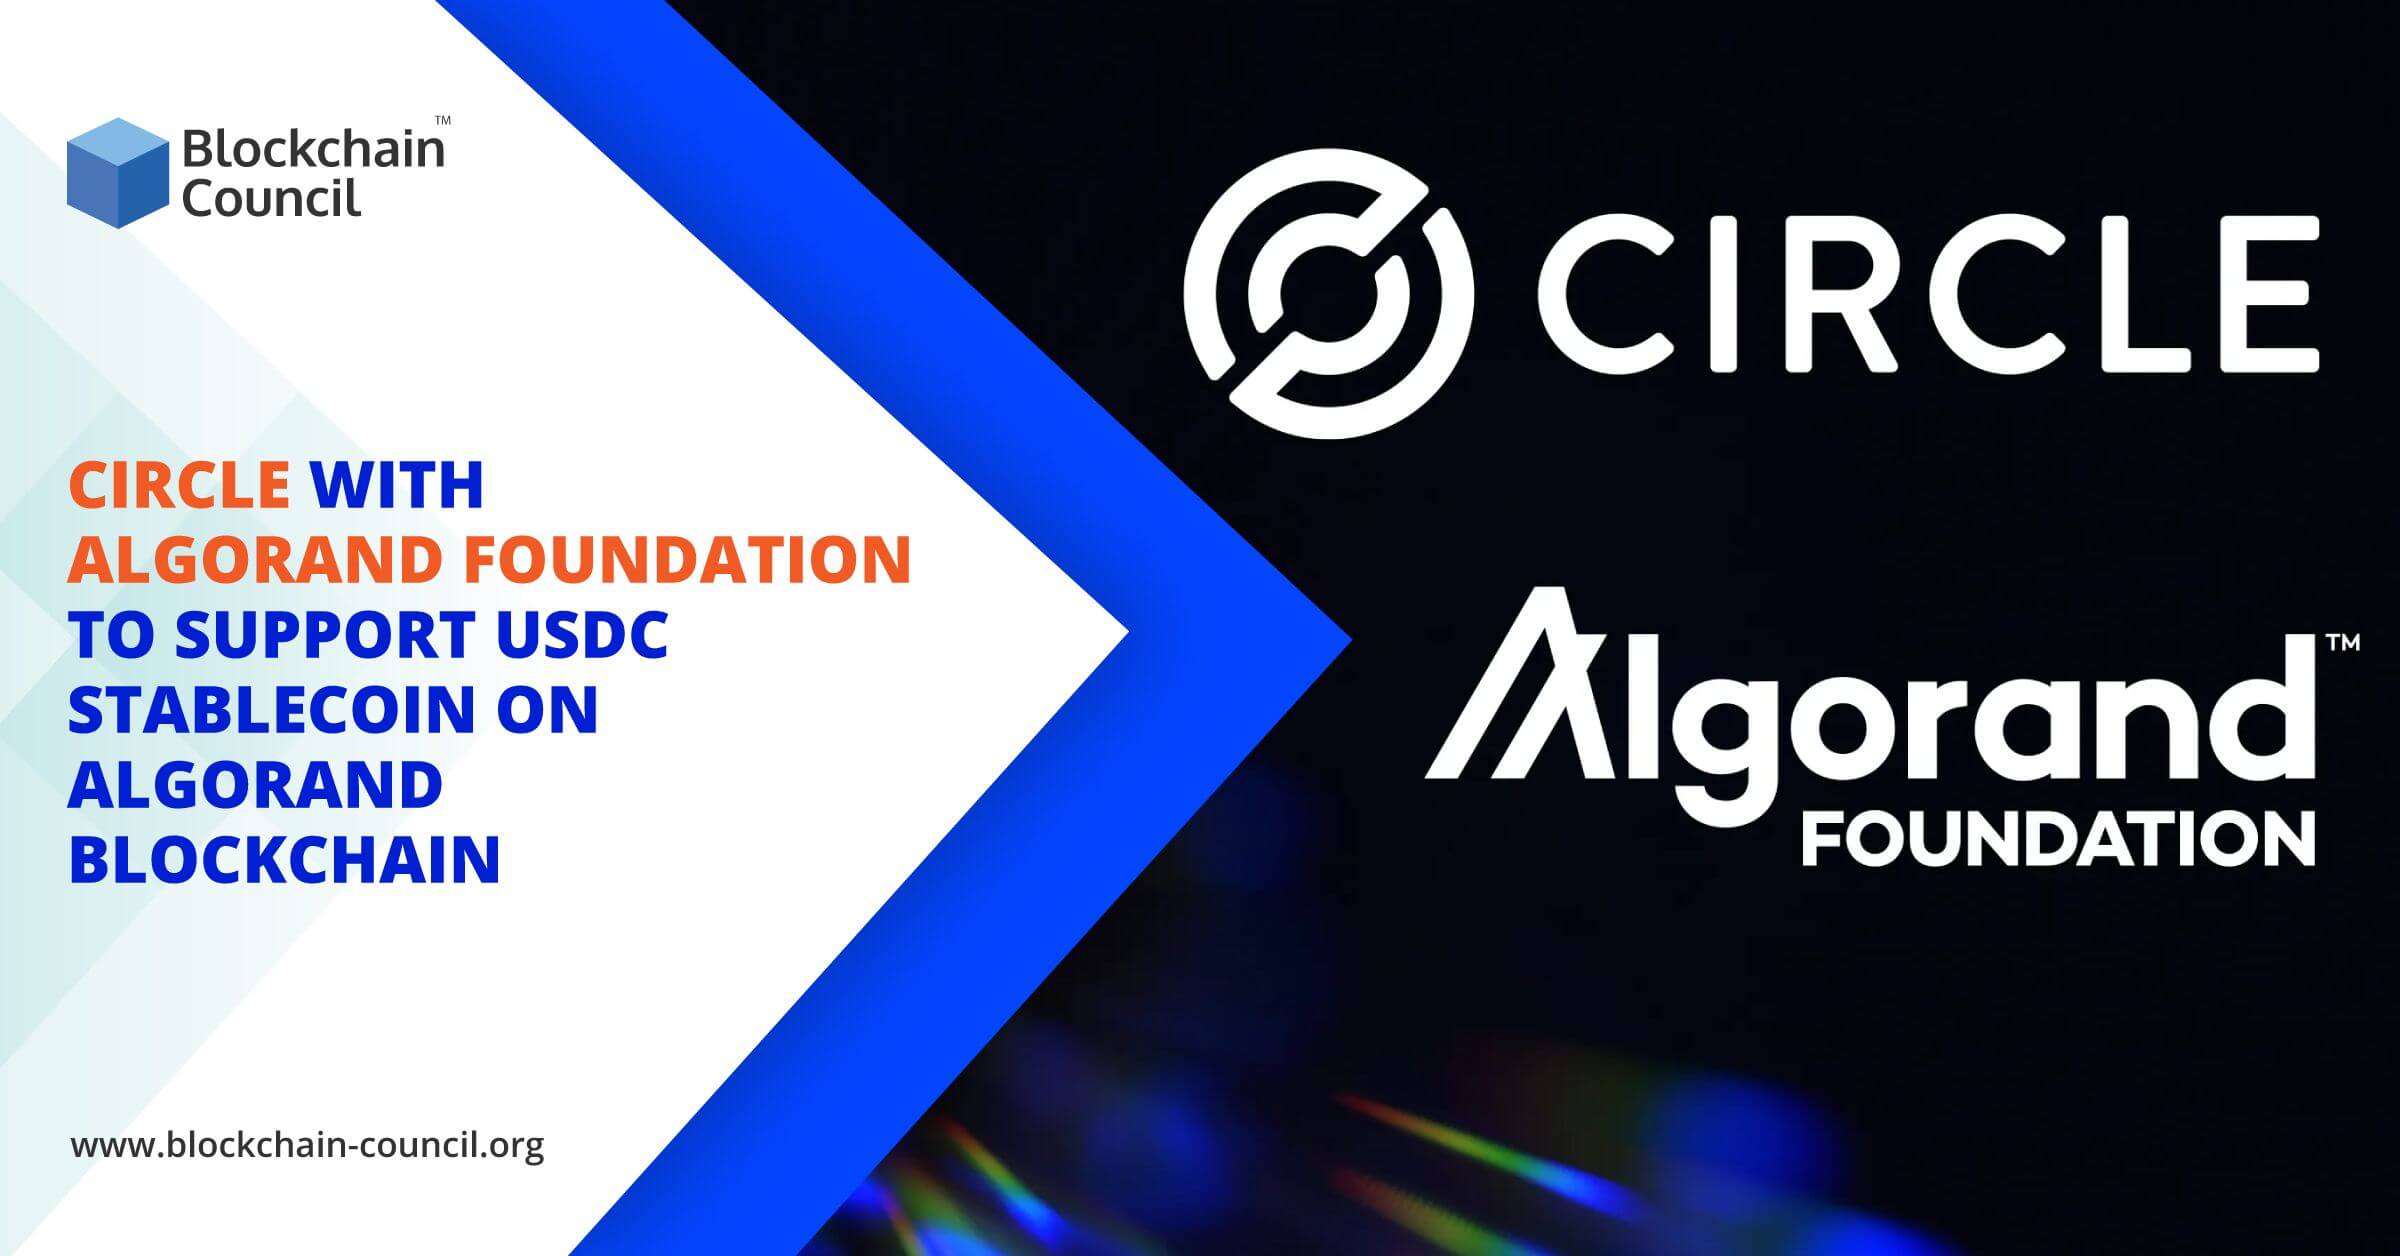 Circle with Algorand Foundation to Support for USDC Stablecoin on Algorand Blockchain